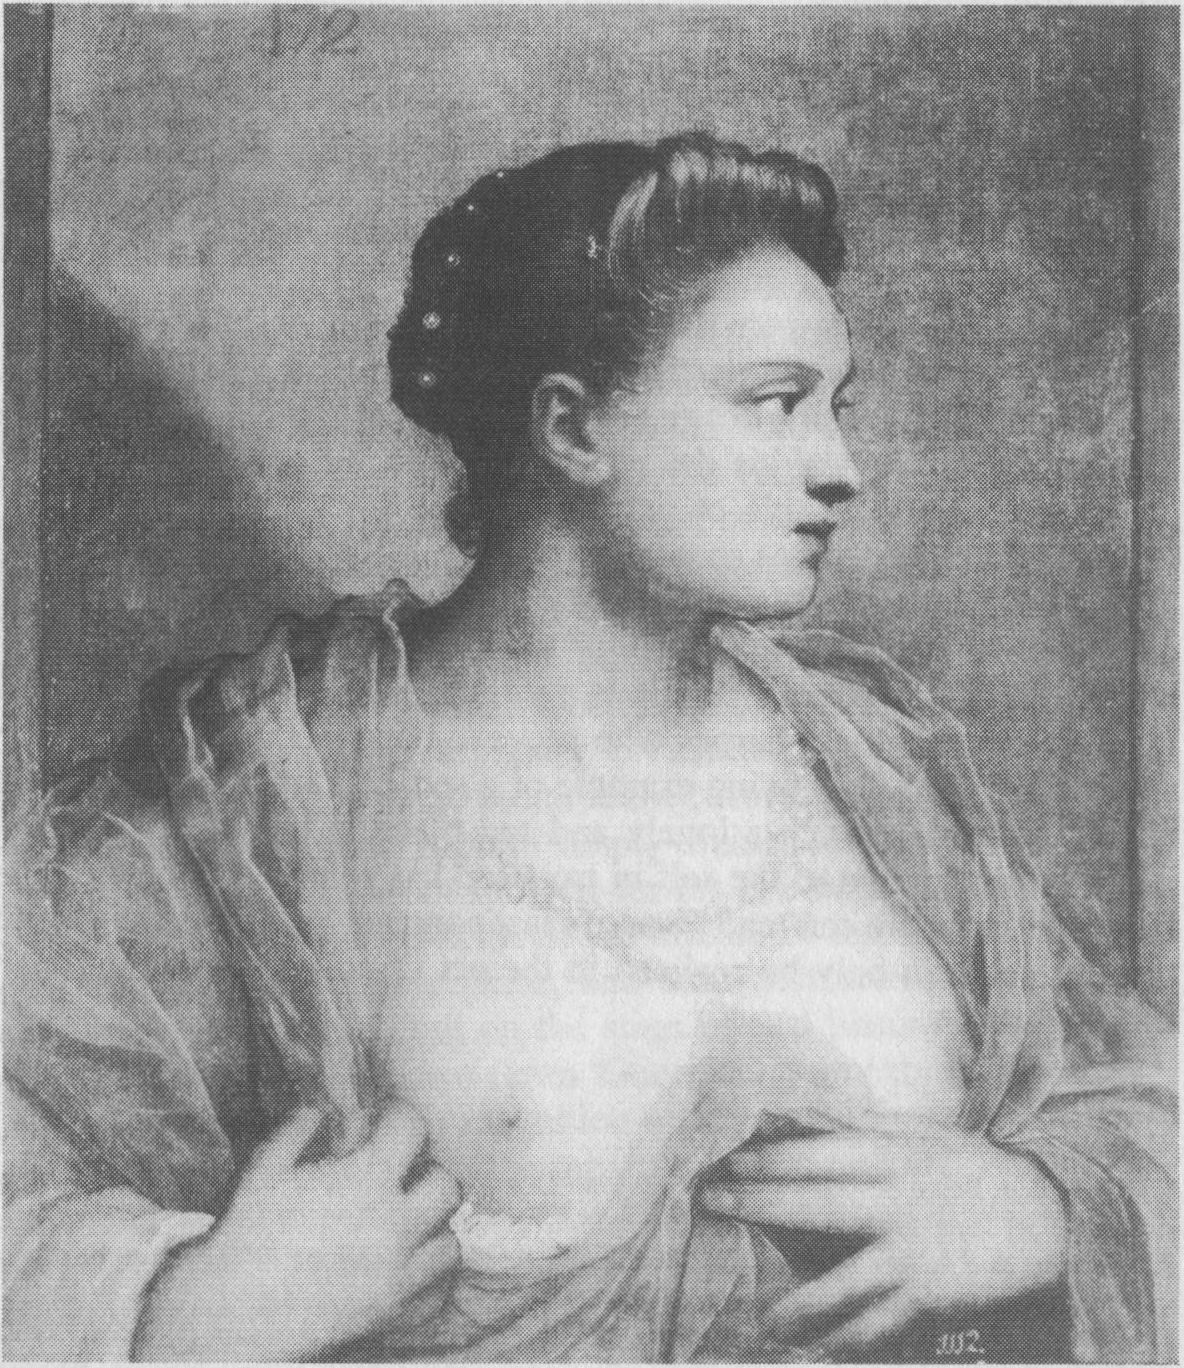 Tintoretto: Woman with Bare Breasts (black/white)